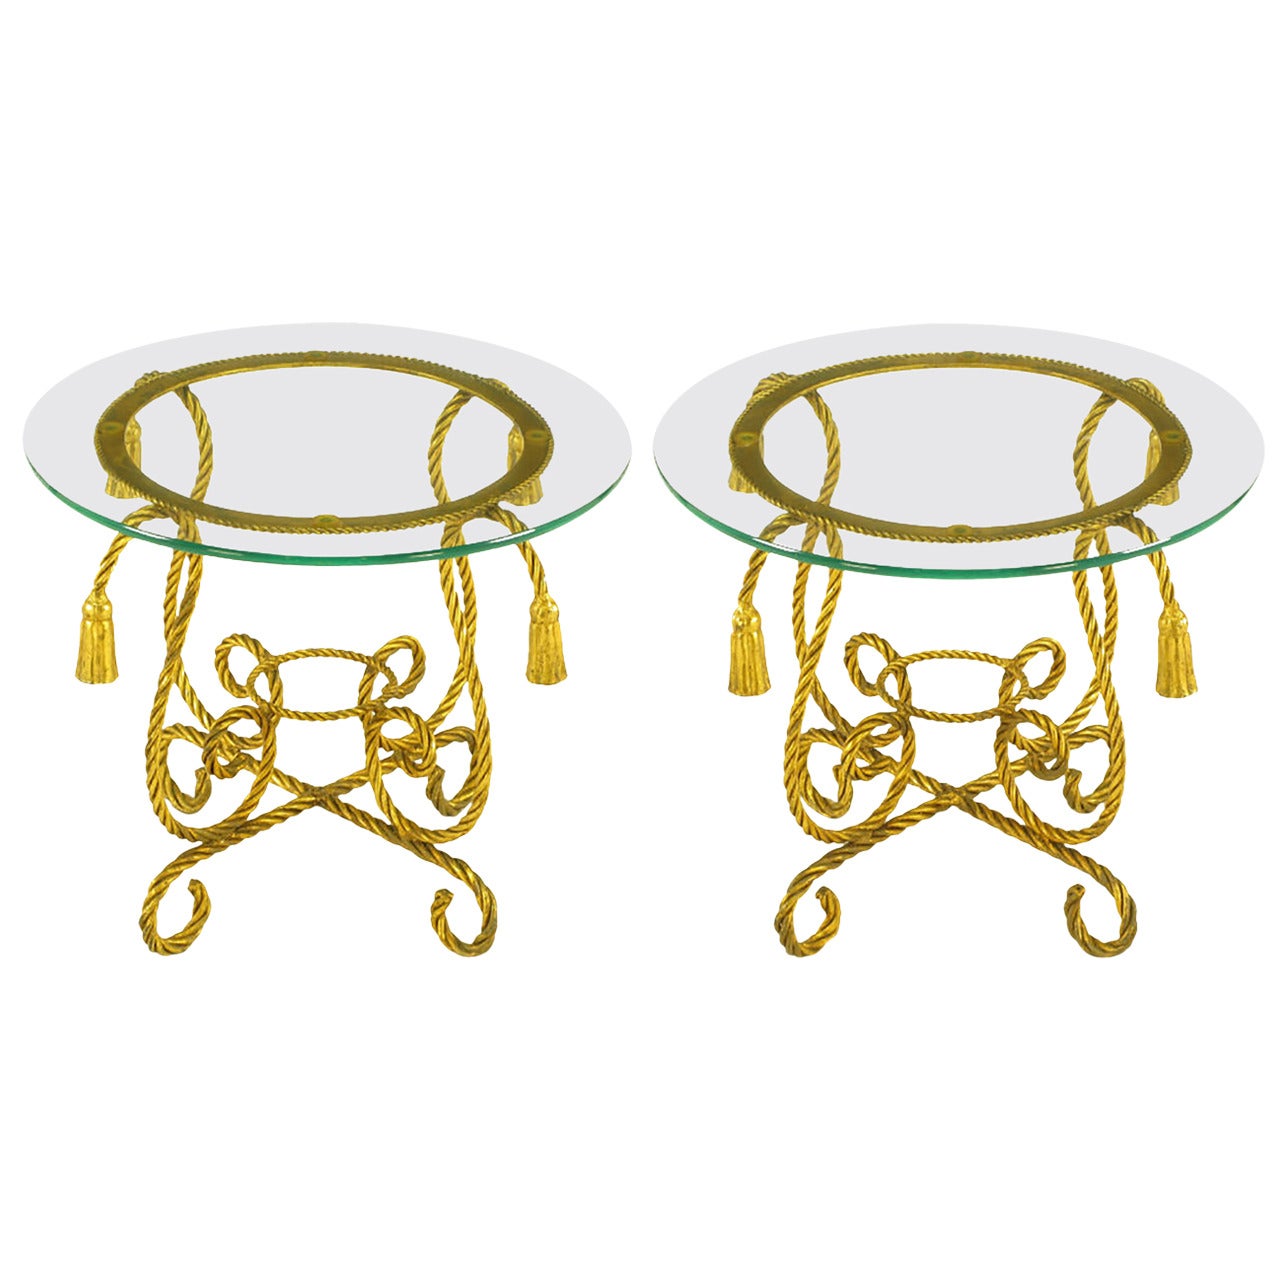 Pair of Italian Gilt Iron Rope Tables with Tassel Ornamentation For Sale